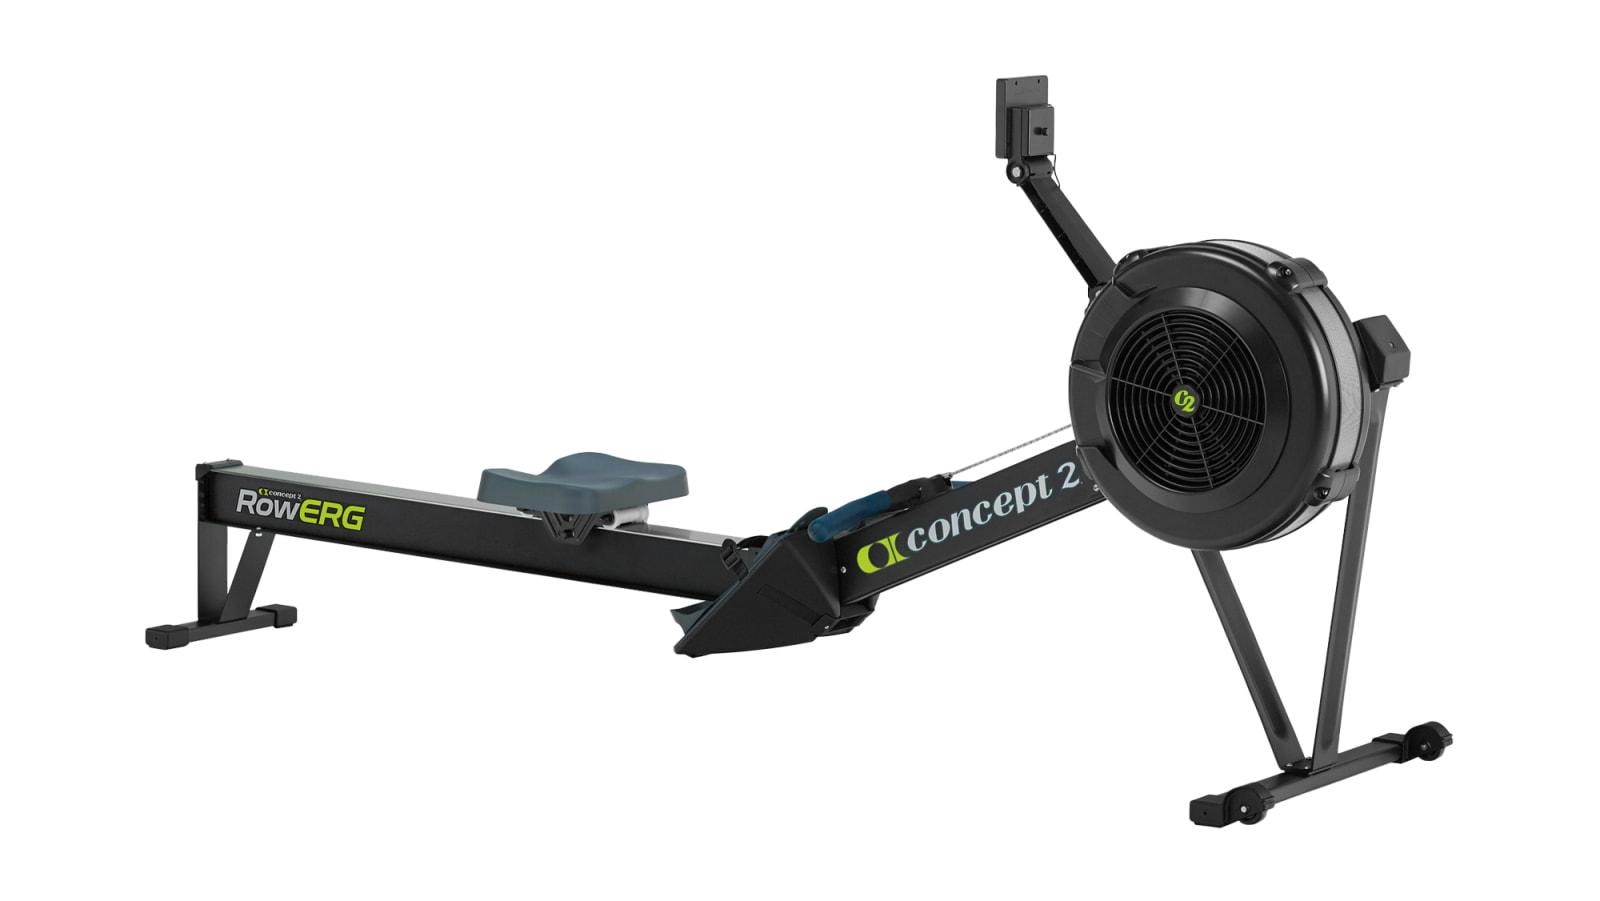 ! 4,3,D,C Concept2 Concept 2 Model E Rower Rowing Machine ERG with PM5 Monitor SERVICED 